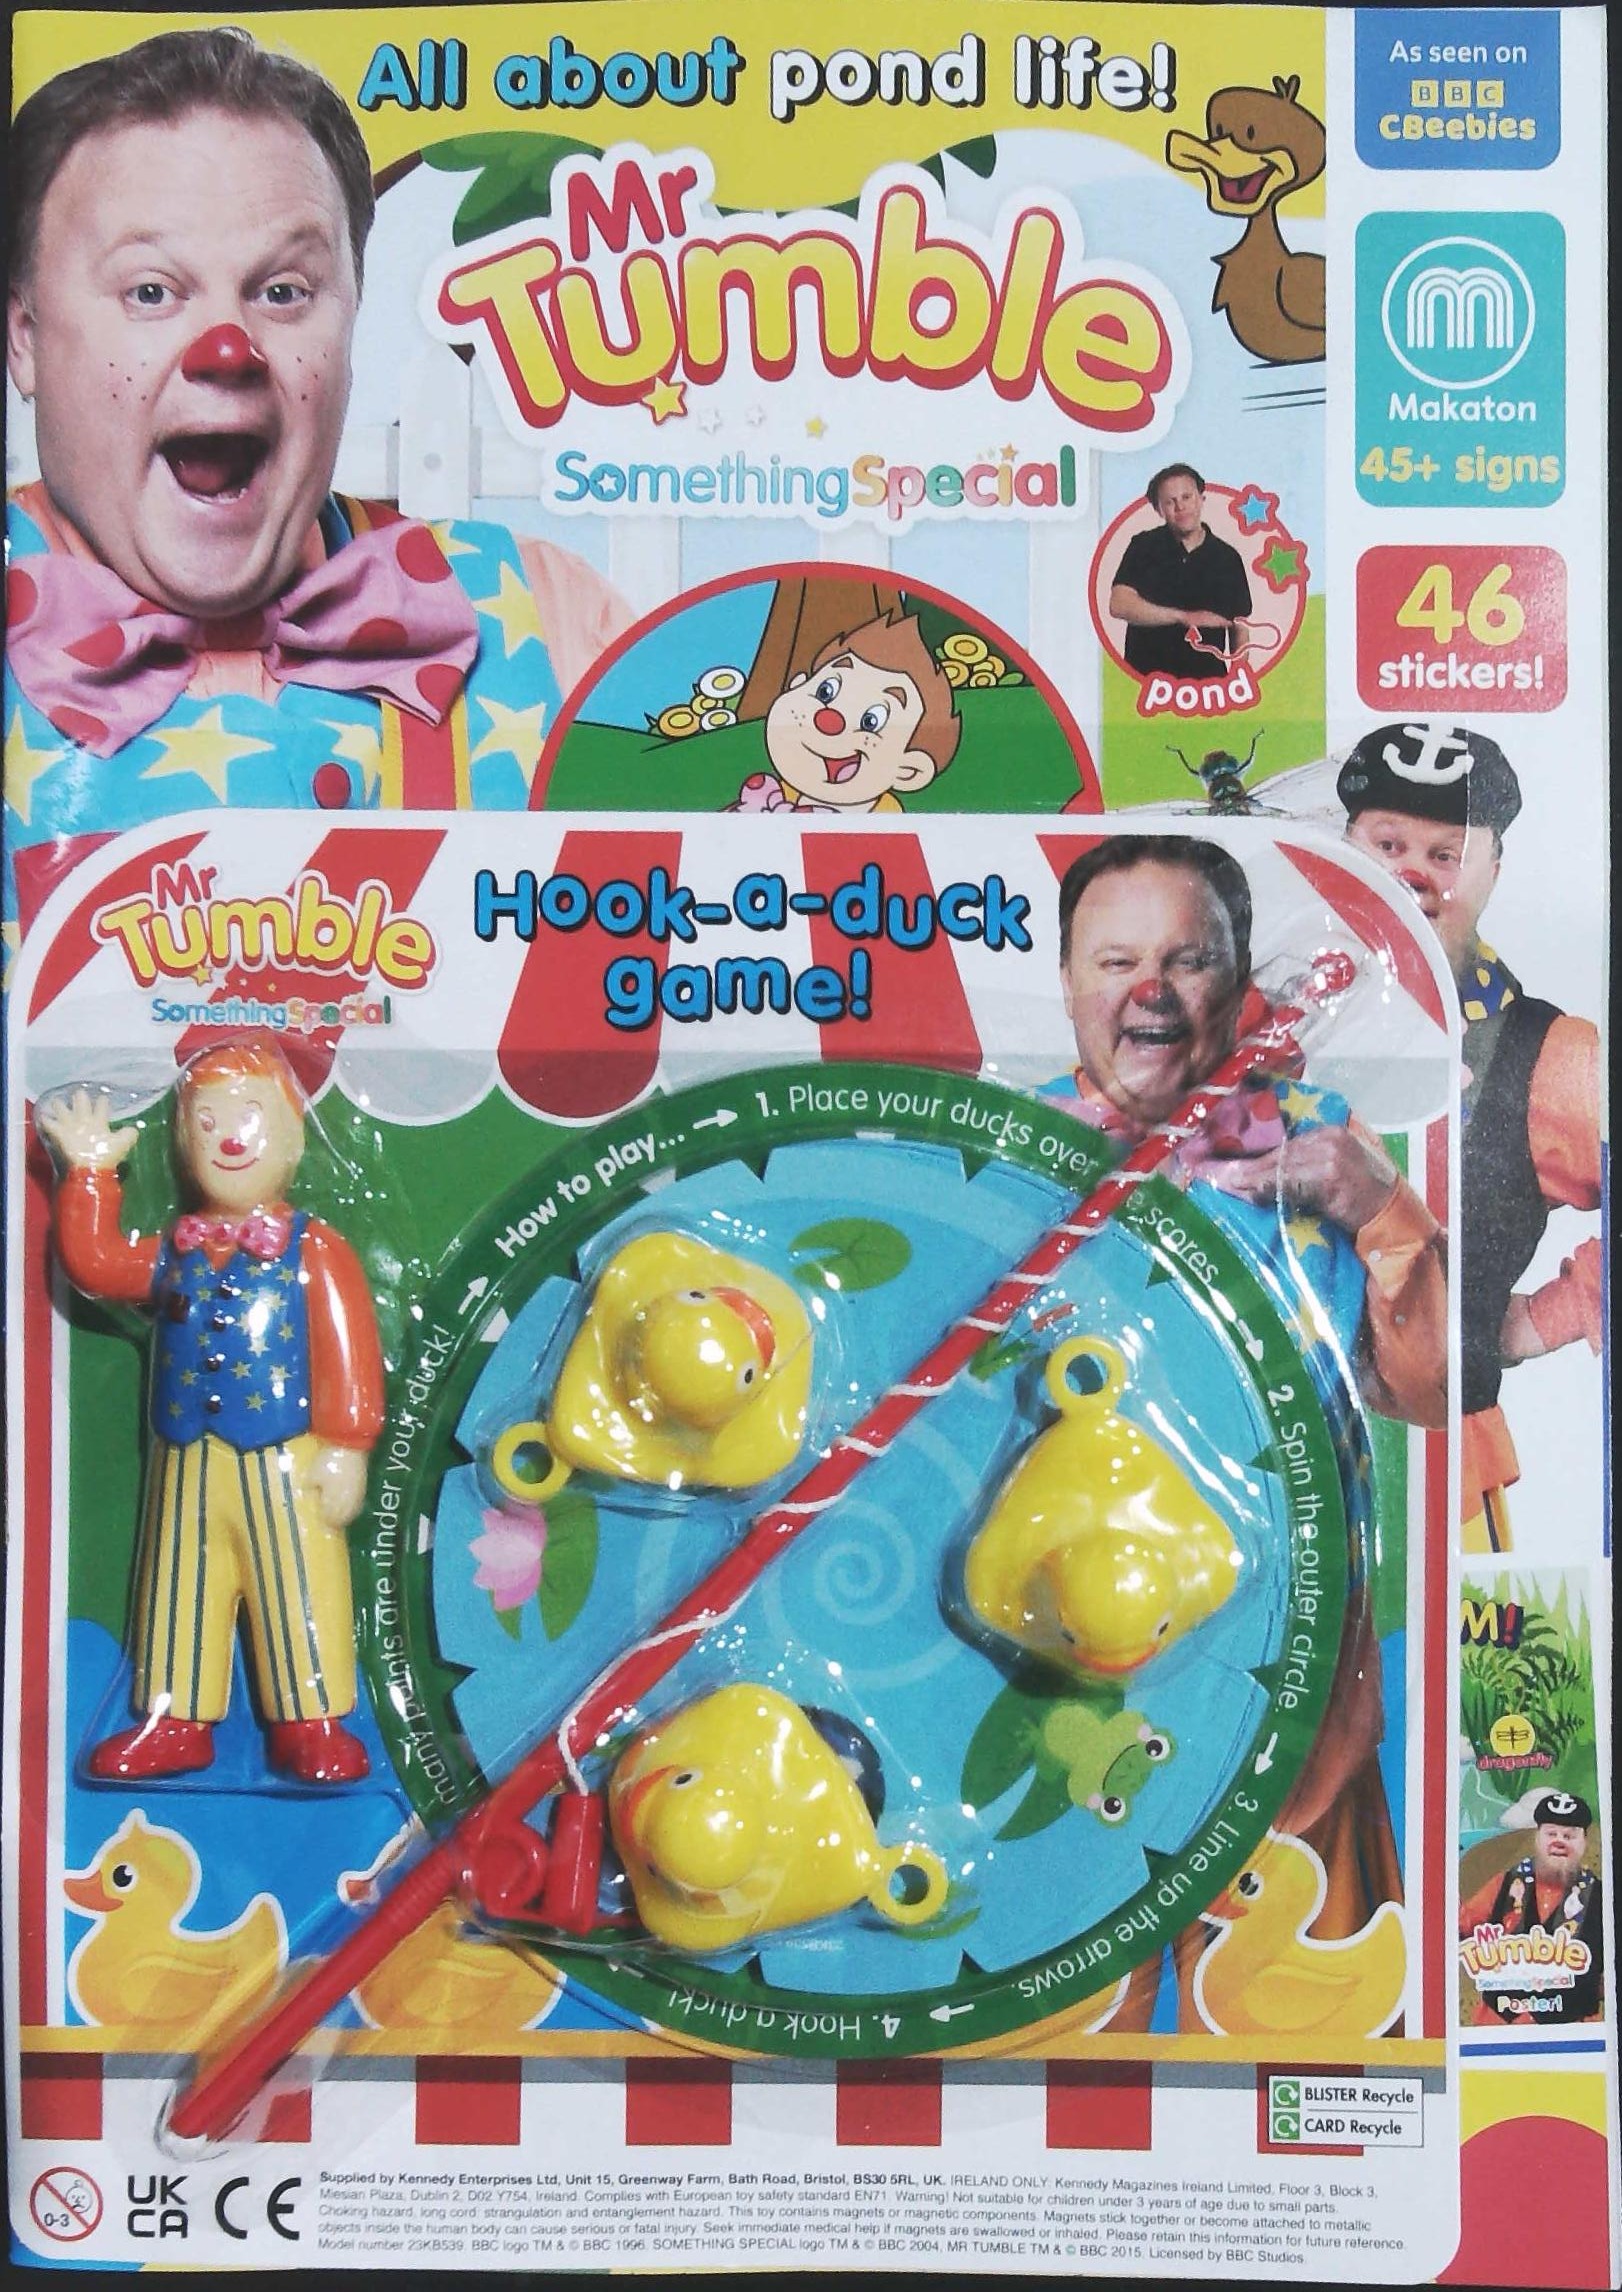 MR TUMBLE SOMETHING SPECIAL